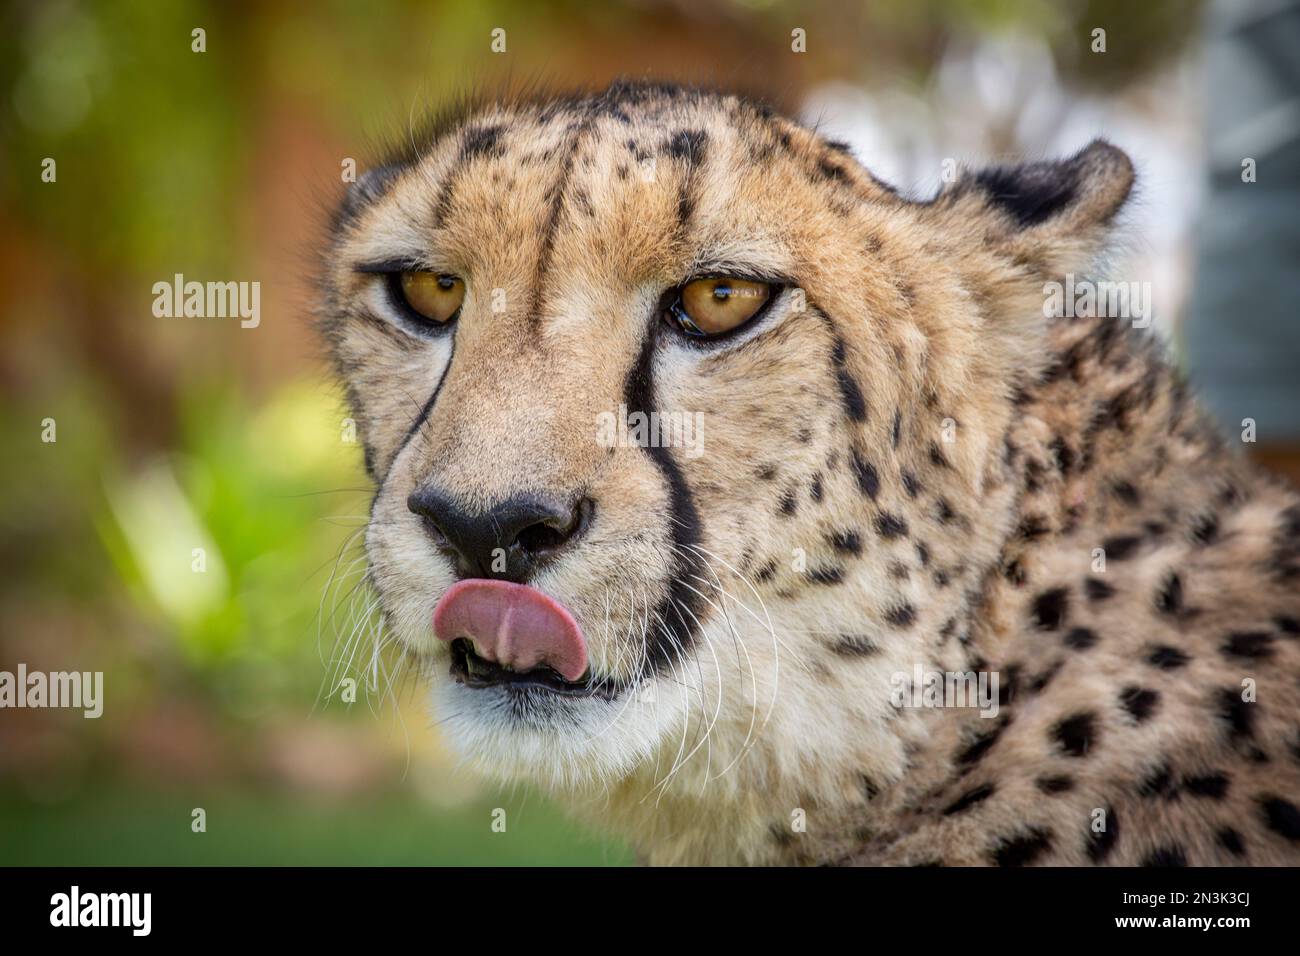 Cheetah with his tongue out licking his lips Stock Photo